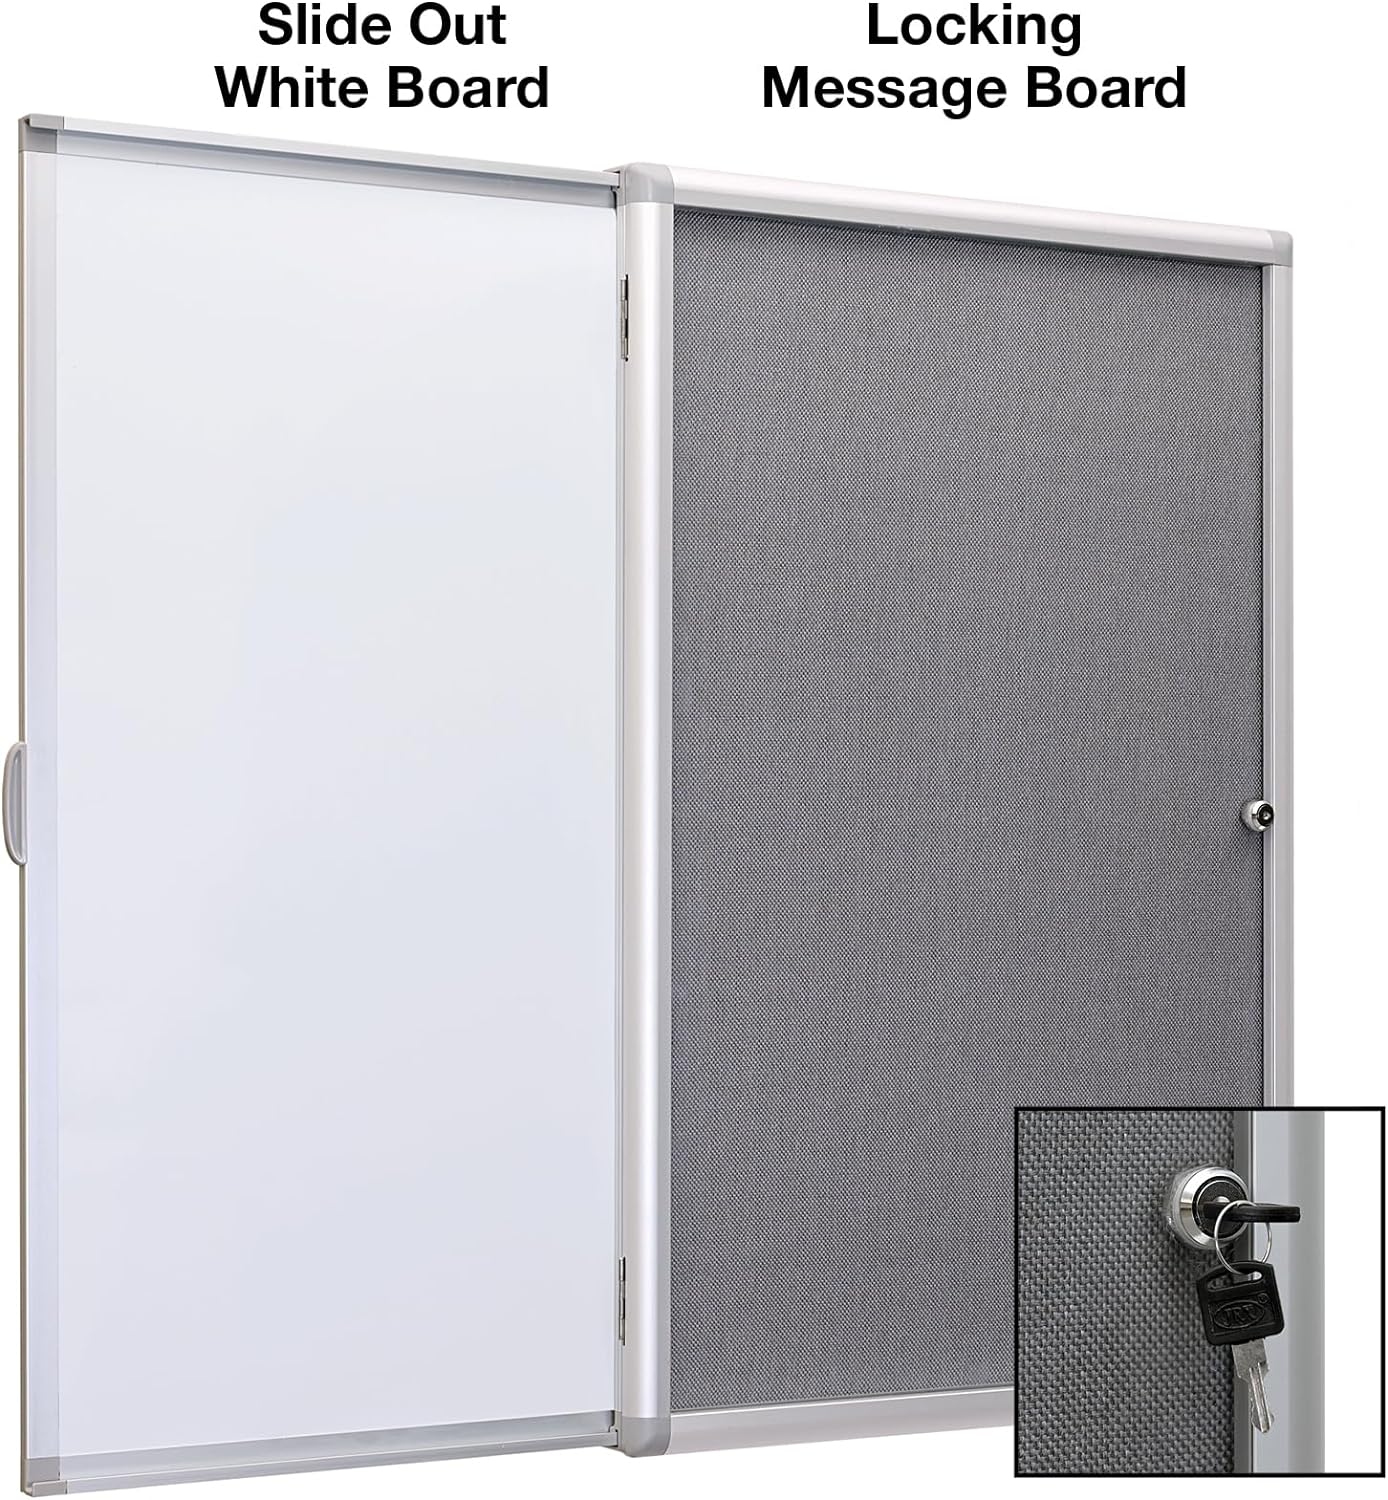 Enclosed Bulletin Board with Sliding whiteboard 36" x 24"